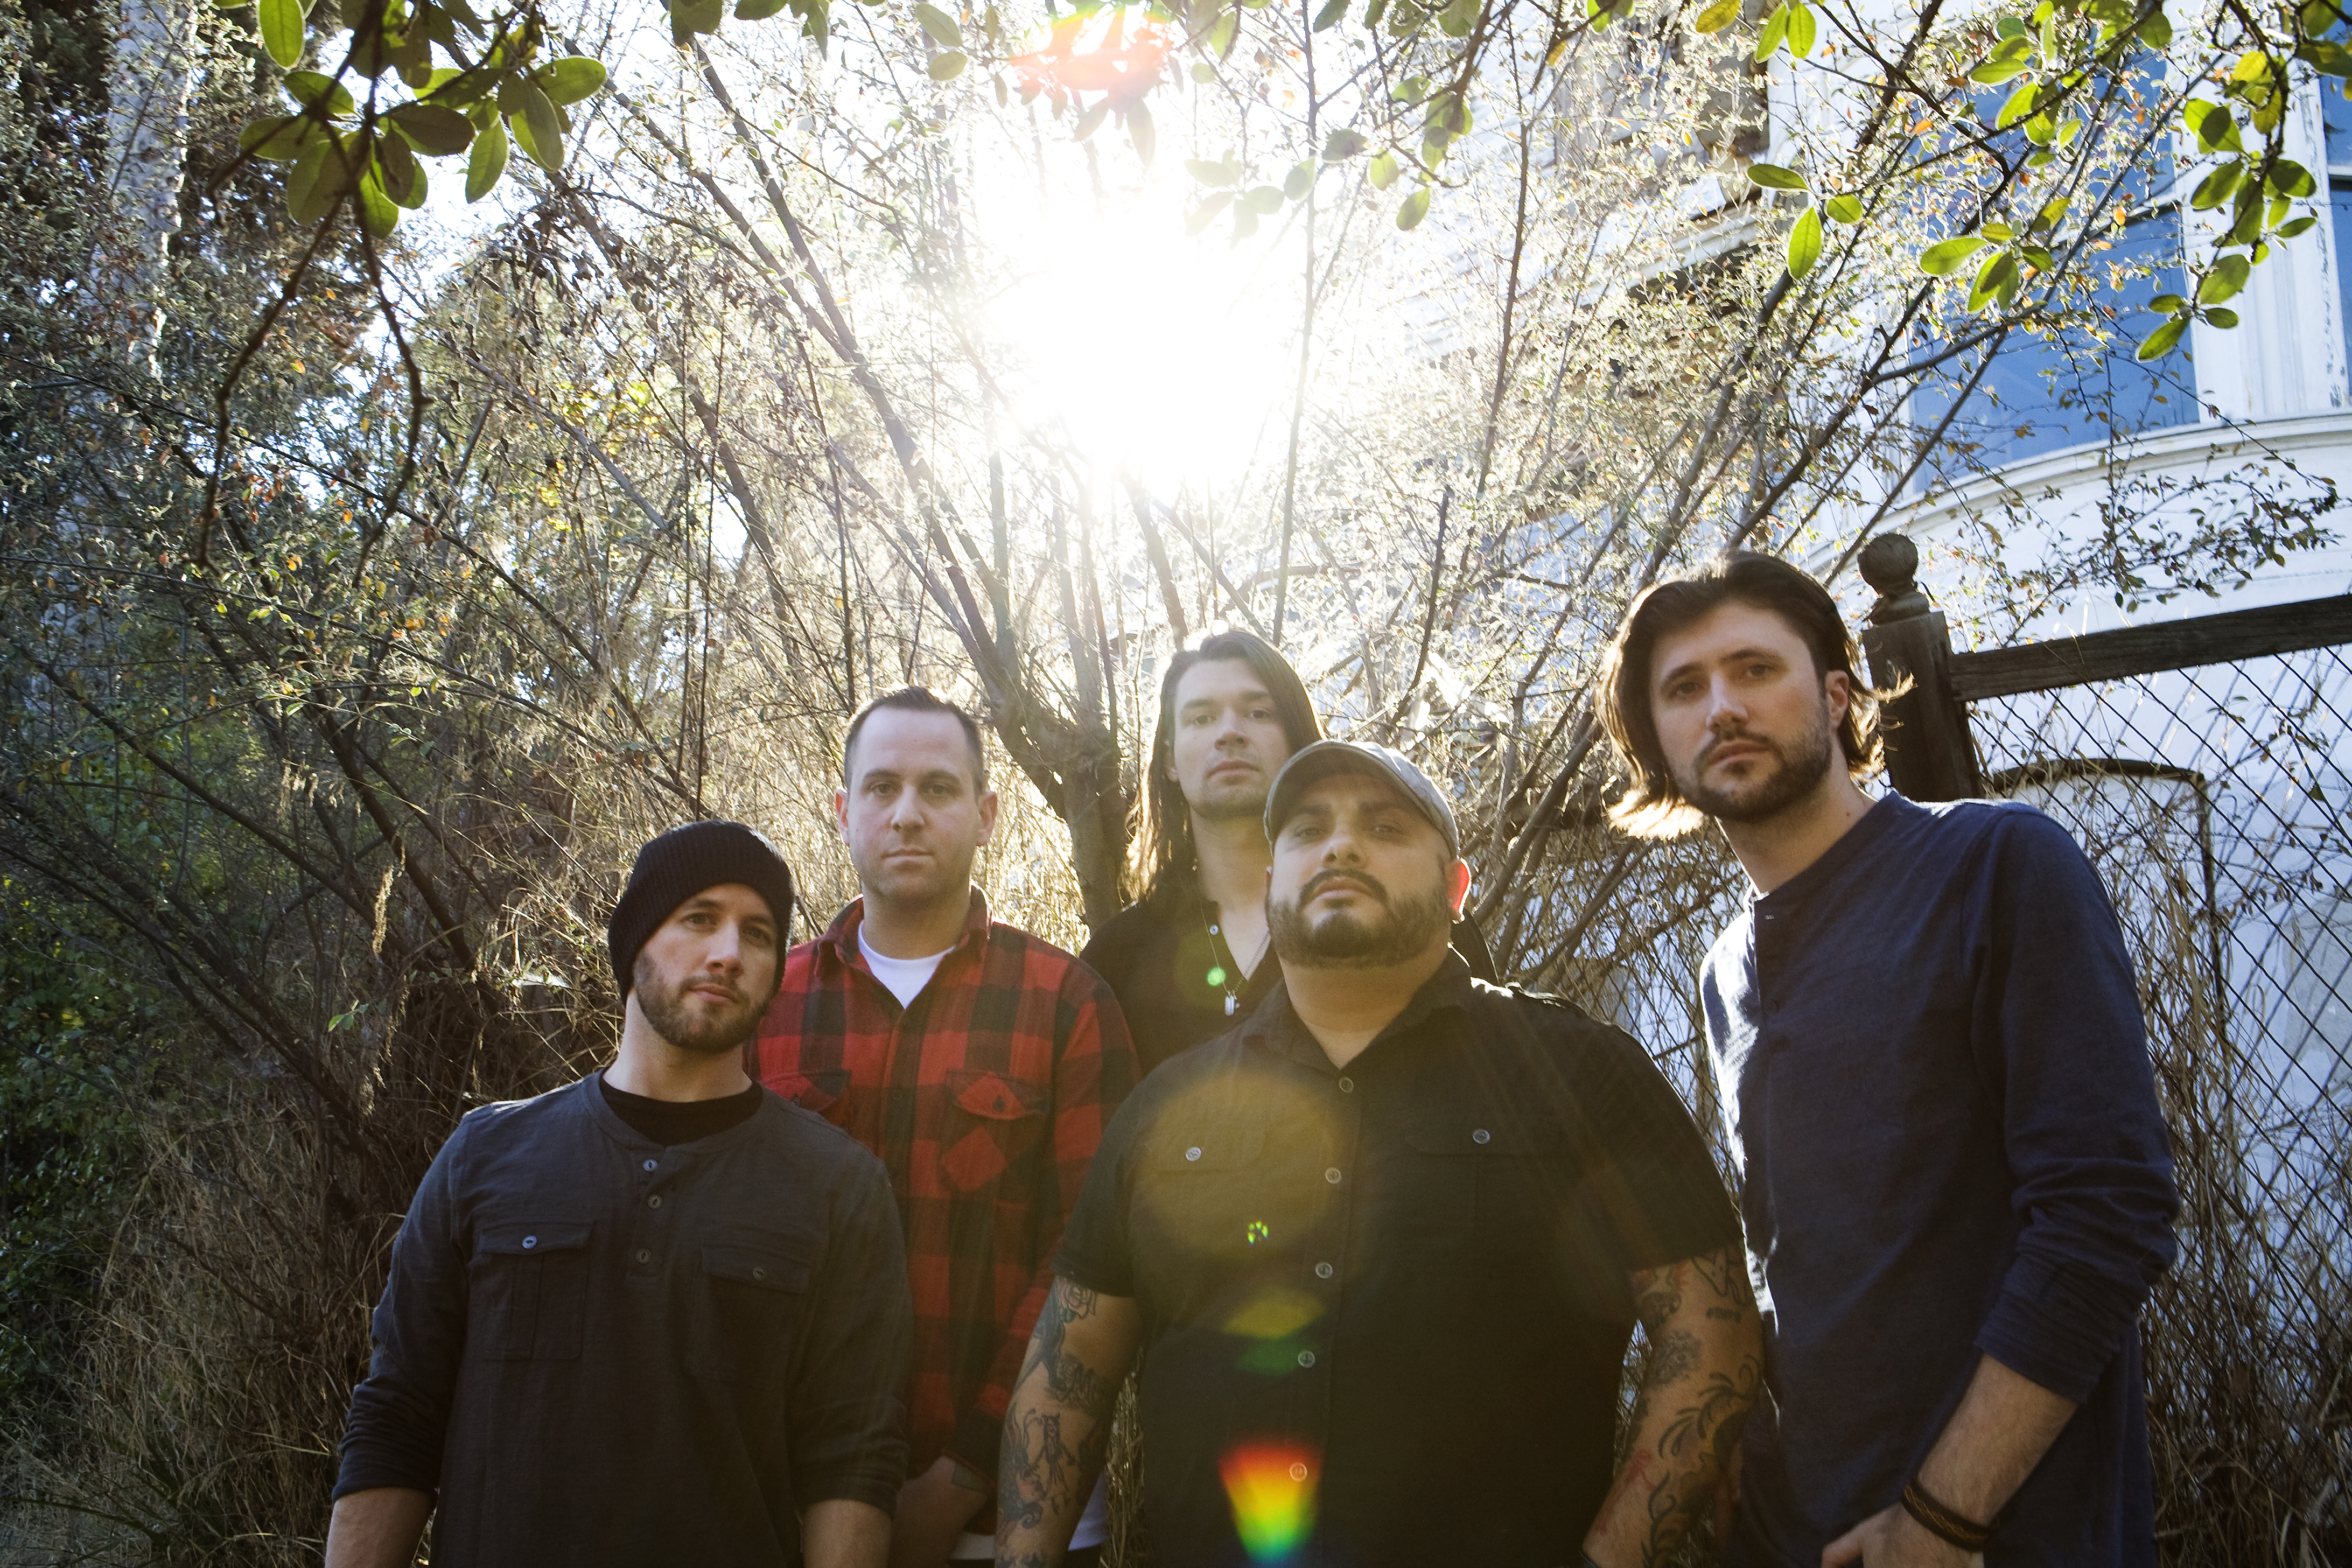 Concert Preview: Taking Back Sunday